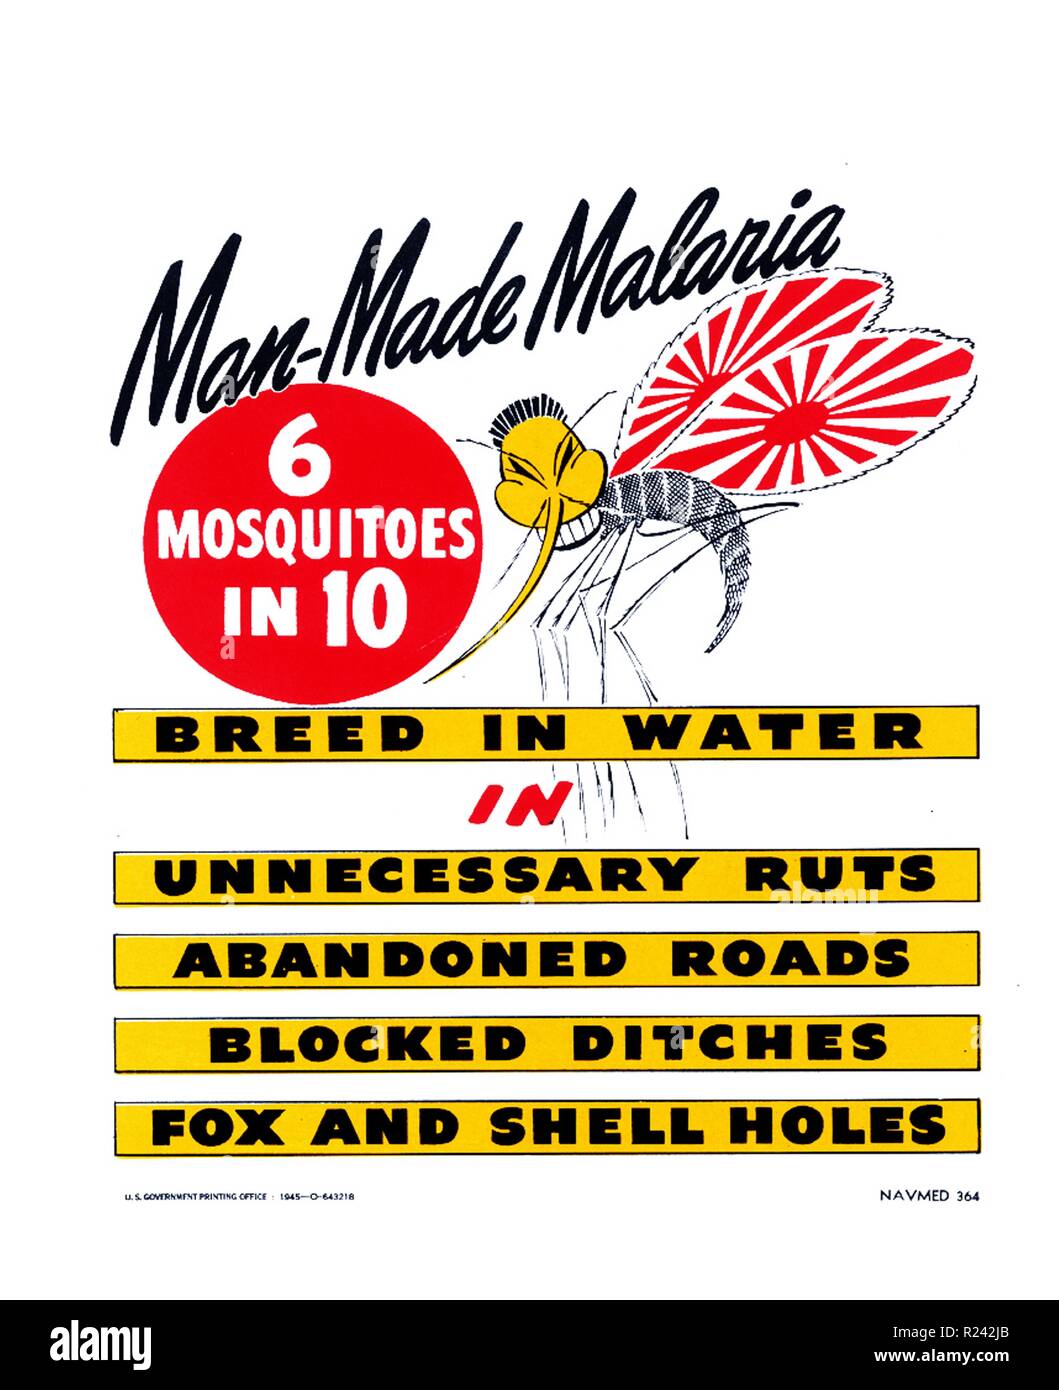 Man-Made Malaria. 6 mosquitoes in 10 breed in water in unnecessary ruts, abandoned roads, blocked ditches, fox and shell holes. U.S. Navy, Bureau of Medicine & Surgery, U.S. Government Printing Office, United States, 1945 War-time U.S. military health campaigns often conflated the Japanese enemy with disease-carrying flies and mosquitoes. Here, an anopheles mosquito is given the stereotypical features of the Japanese enemy and has the rising sun of the Japanese imperial flag Stock Photo